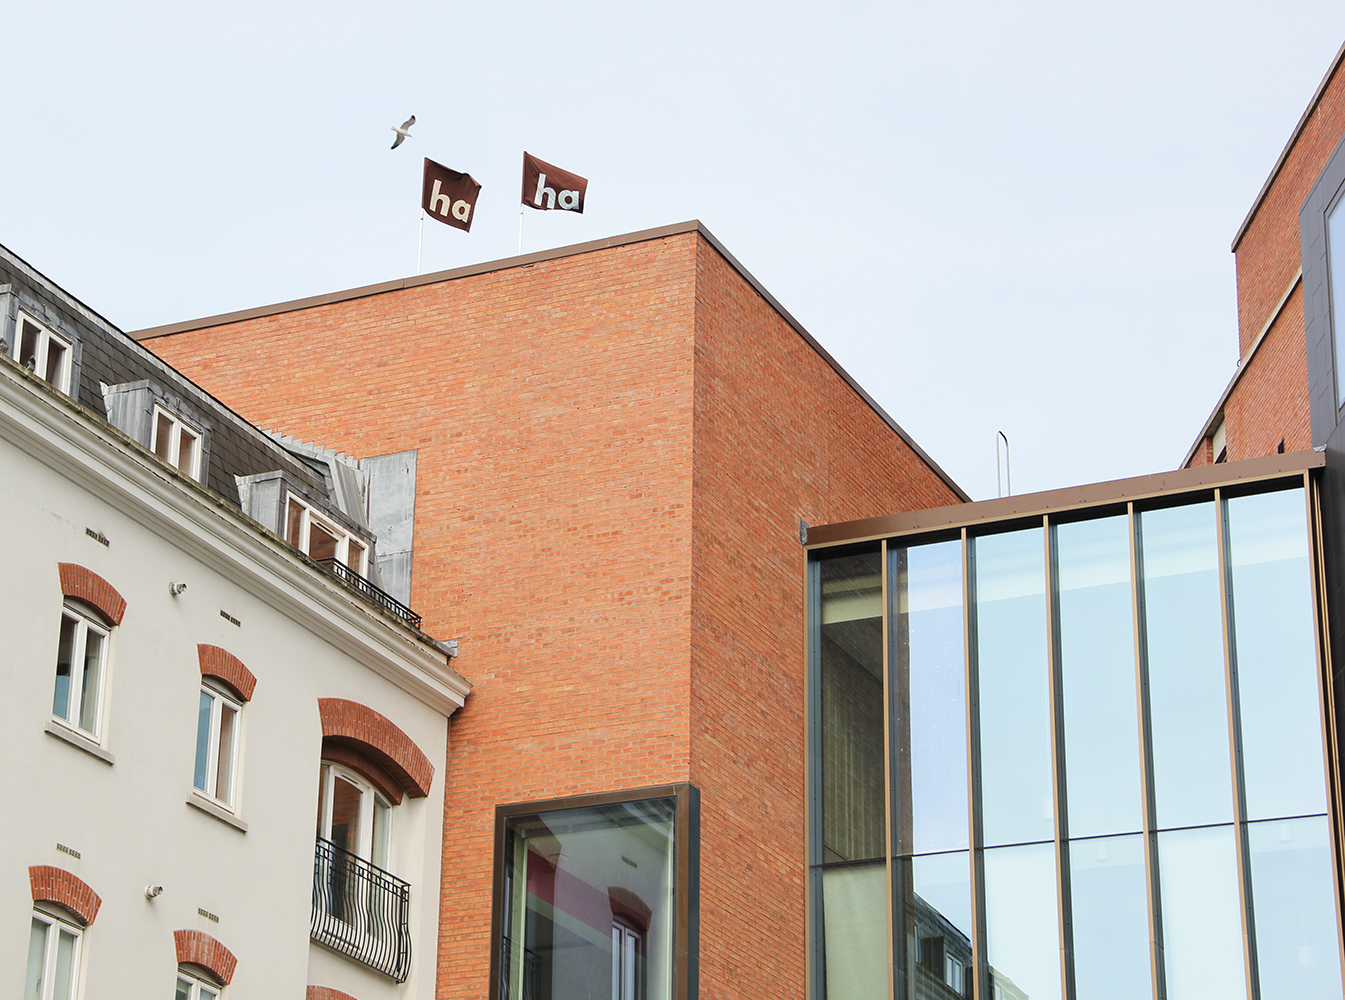 Image of two 'ha ha' flags on the MAC Art Centre building - clearly displaying 'ha ha'.